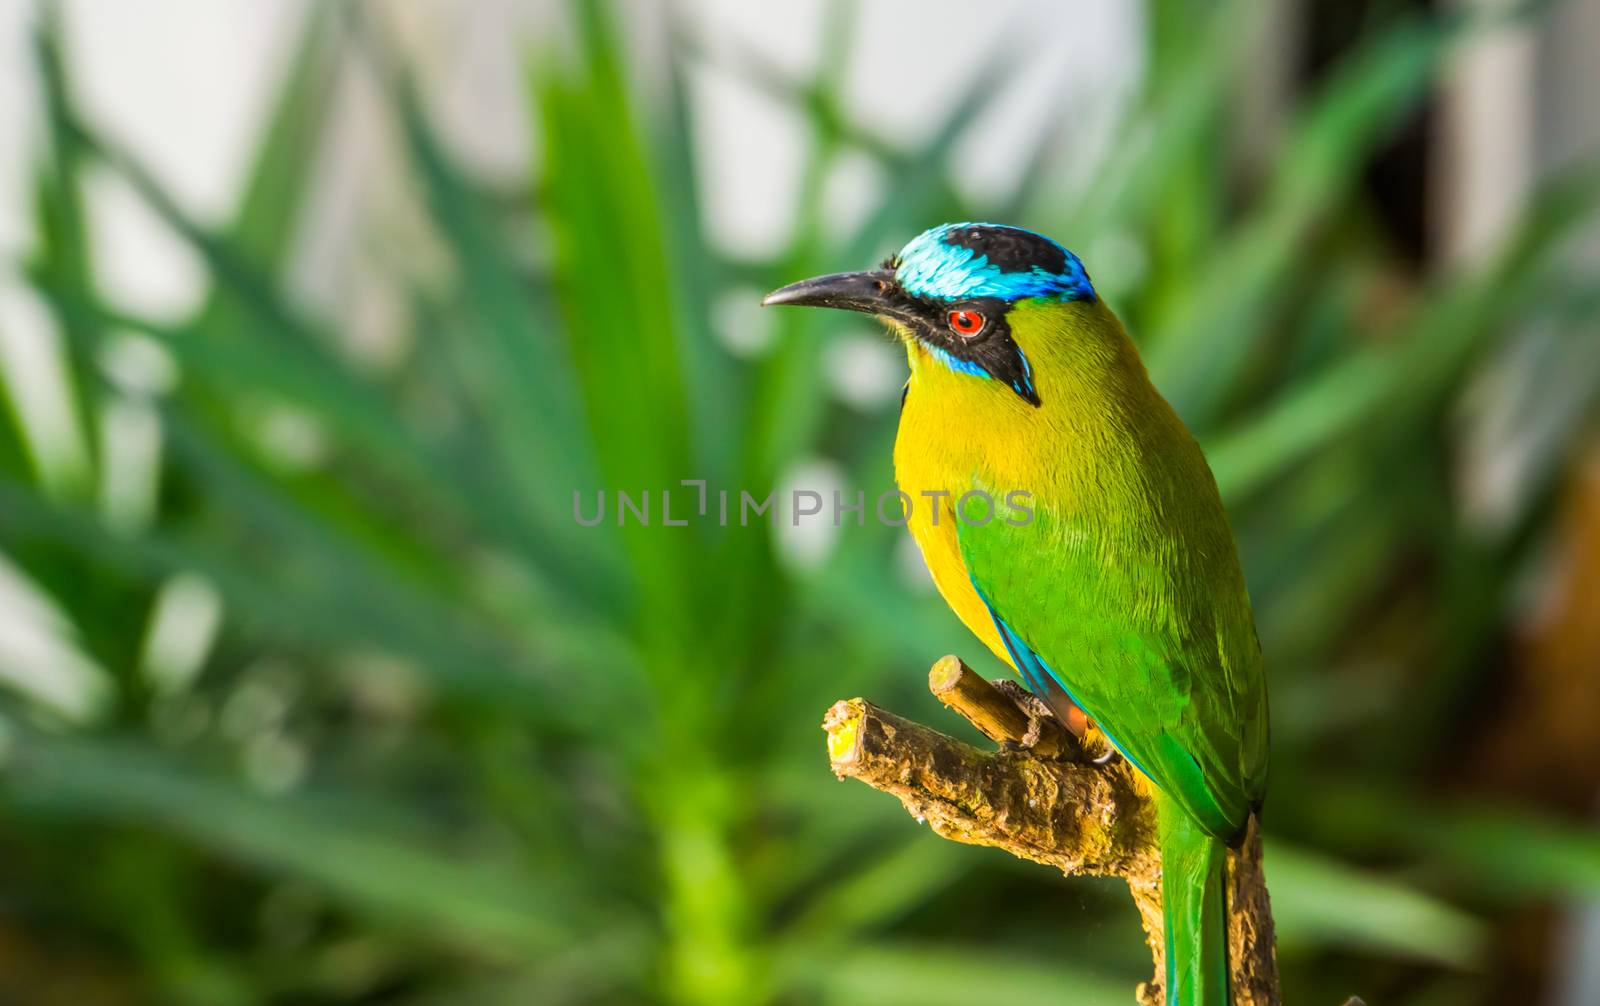 closeup portrait of an amazonian motmot, colorful tropical bird specie from South America by charlottebleijenberg